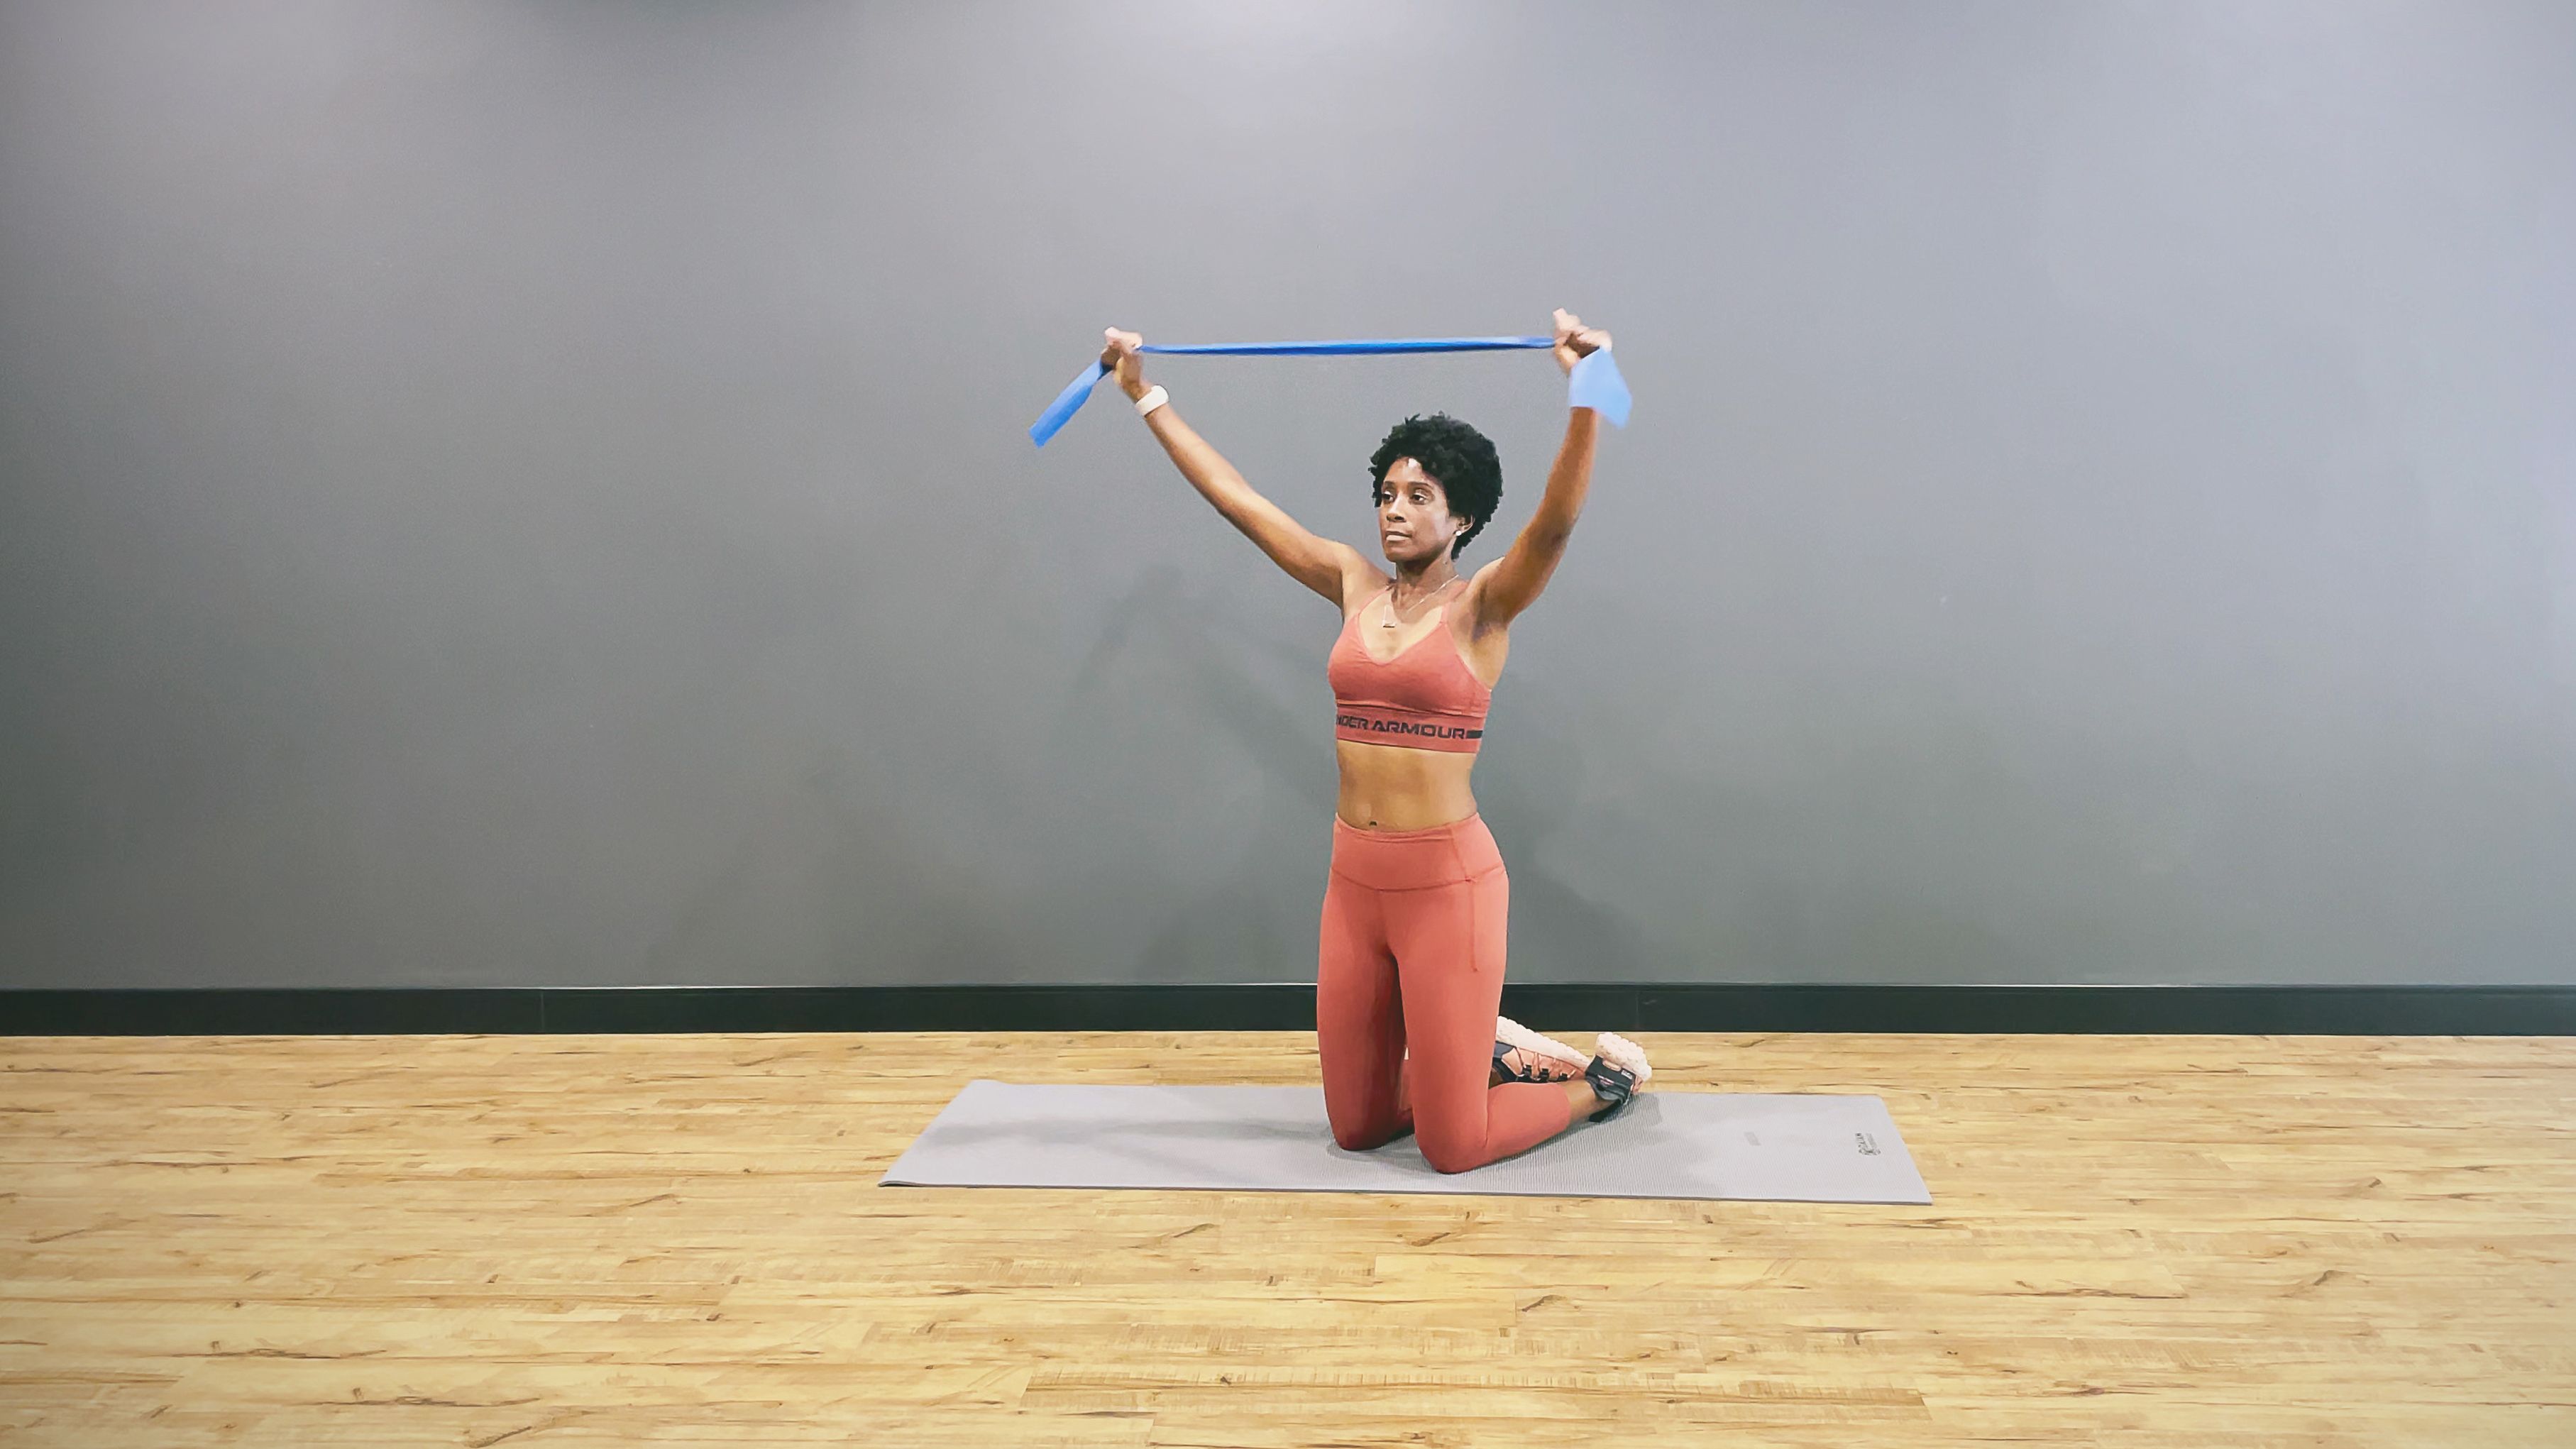 Yoga Shoulder Openers: Yoga Poses for Shoulders and Posture